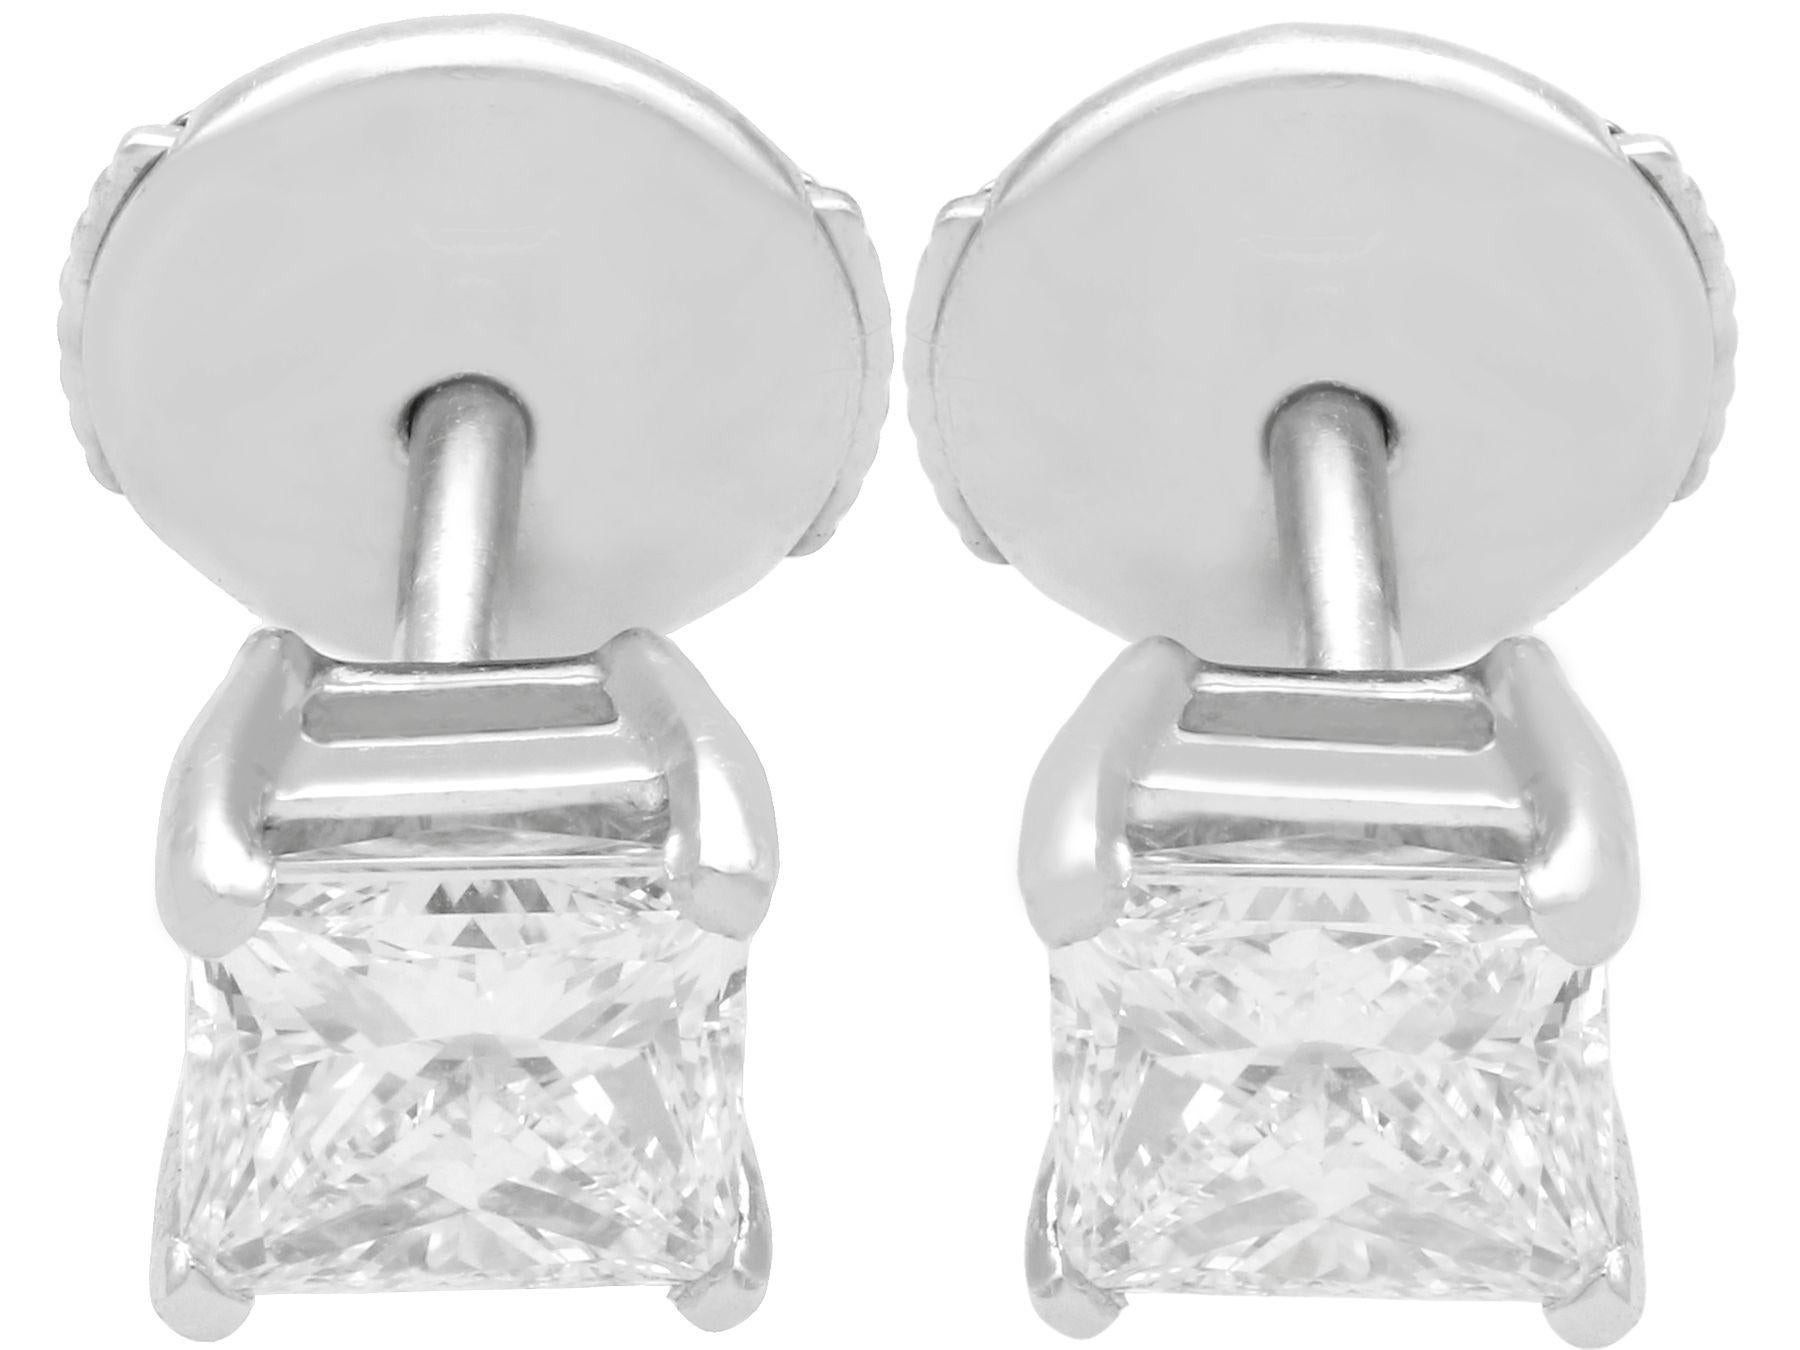 An impressive pair of contemporary 1.41 carat diamond and platinum stud earrings; part of our diverse diamond jewelry and estate jewelry collections.

These fine and impressive princess cut diamond earrings have been crafted in platinum.

The